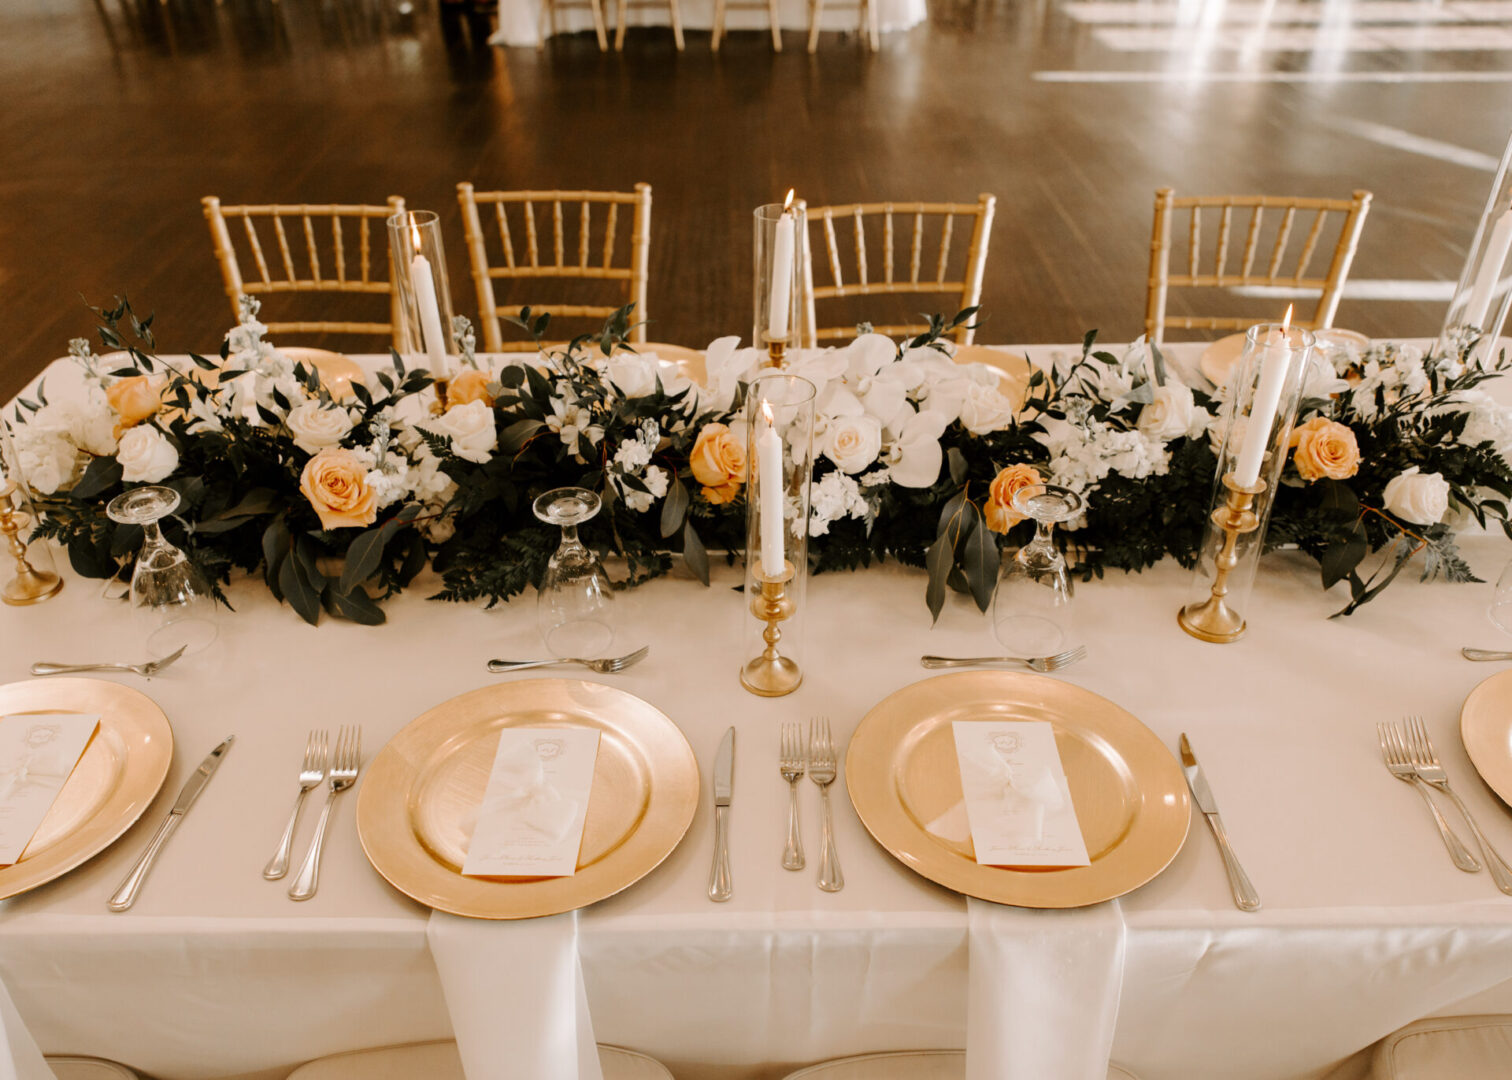 Cream Color Plates Placed on a White Cloth Table